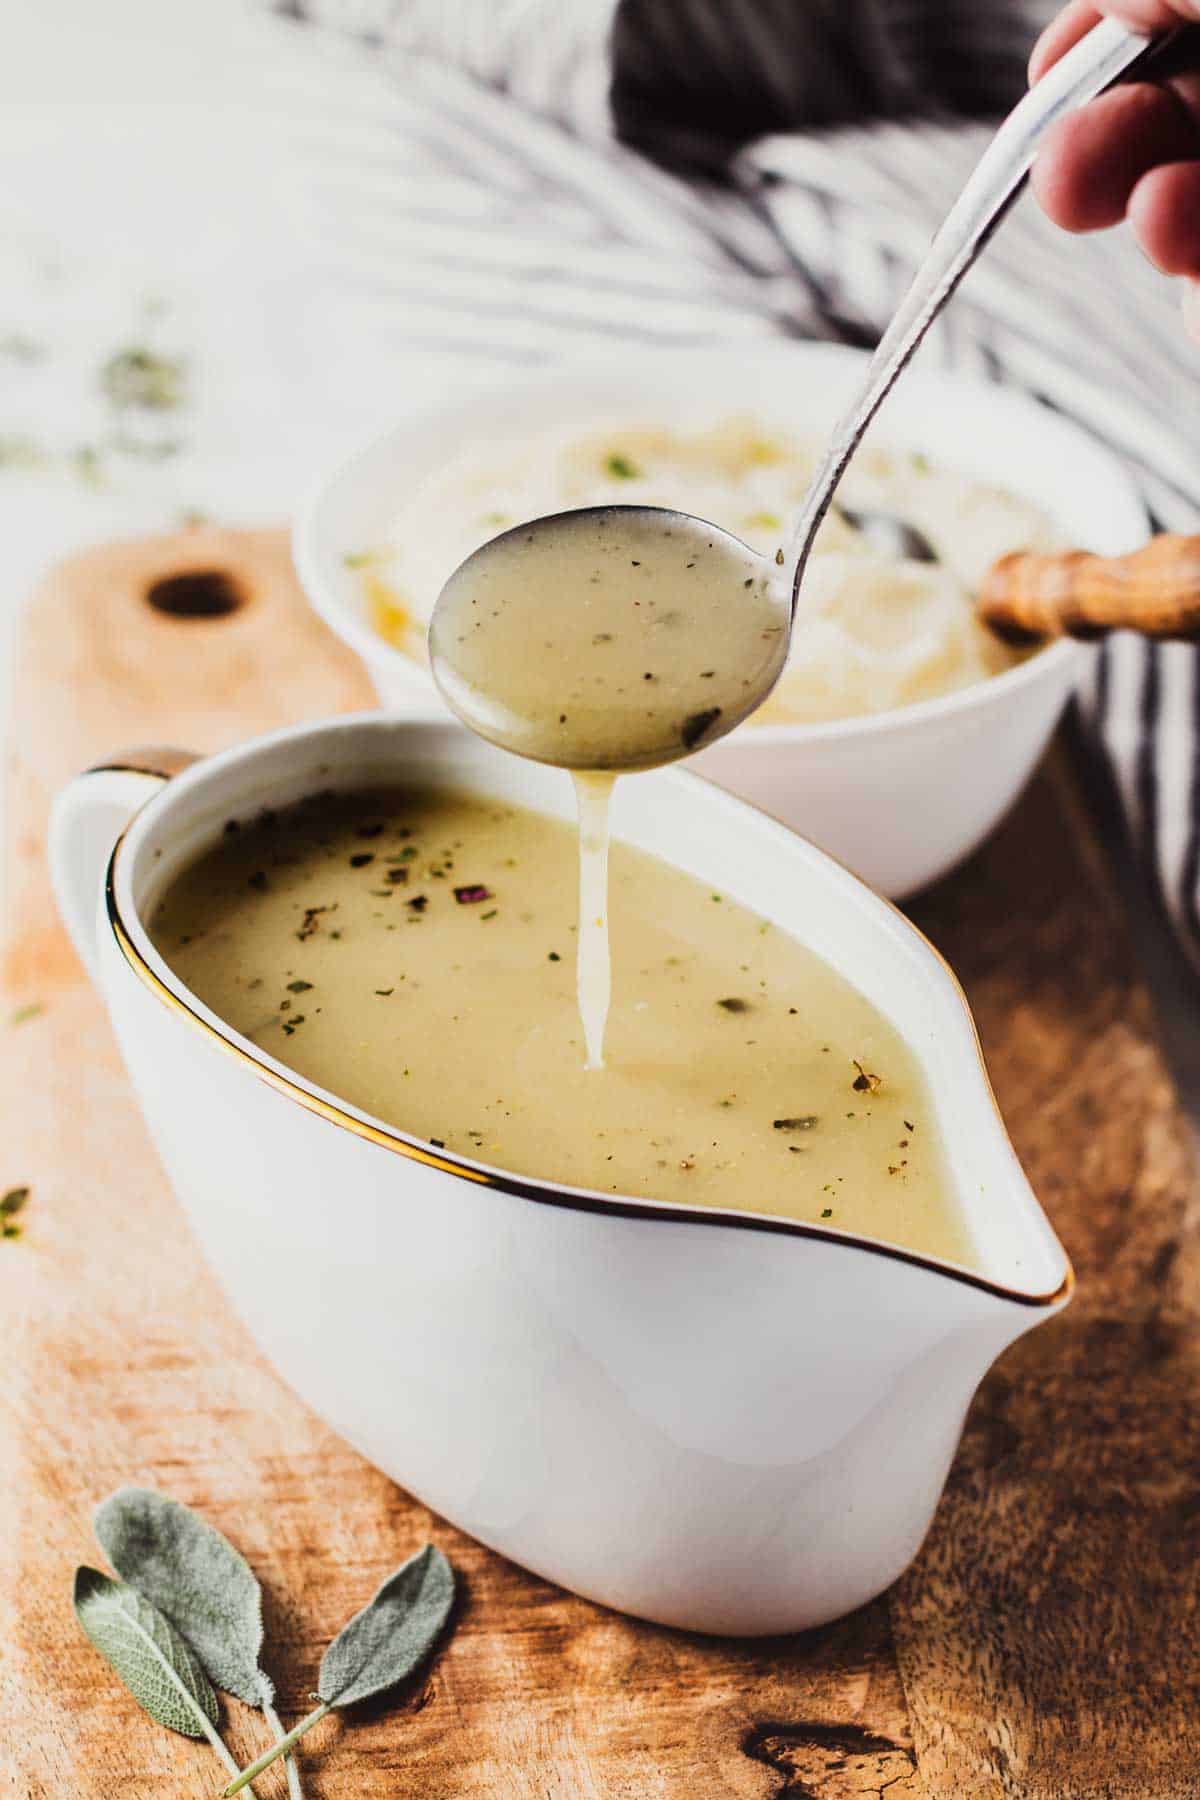 Gluten-free gravy in a gravy boat dripping from a spoon above.